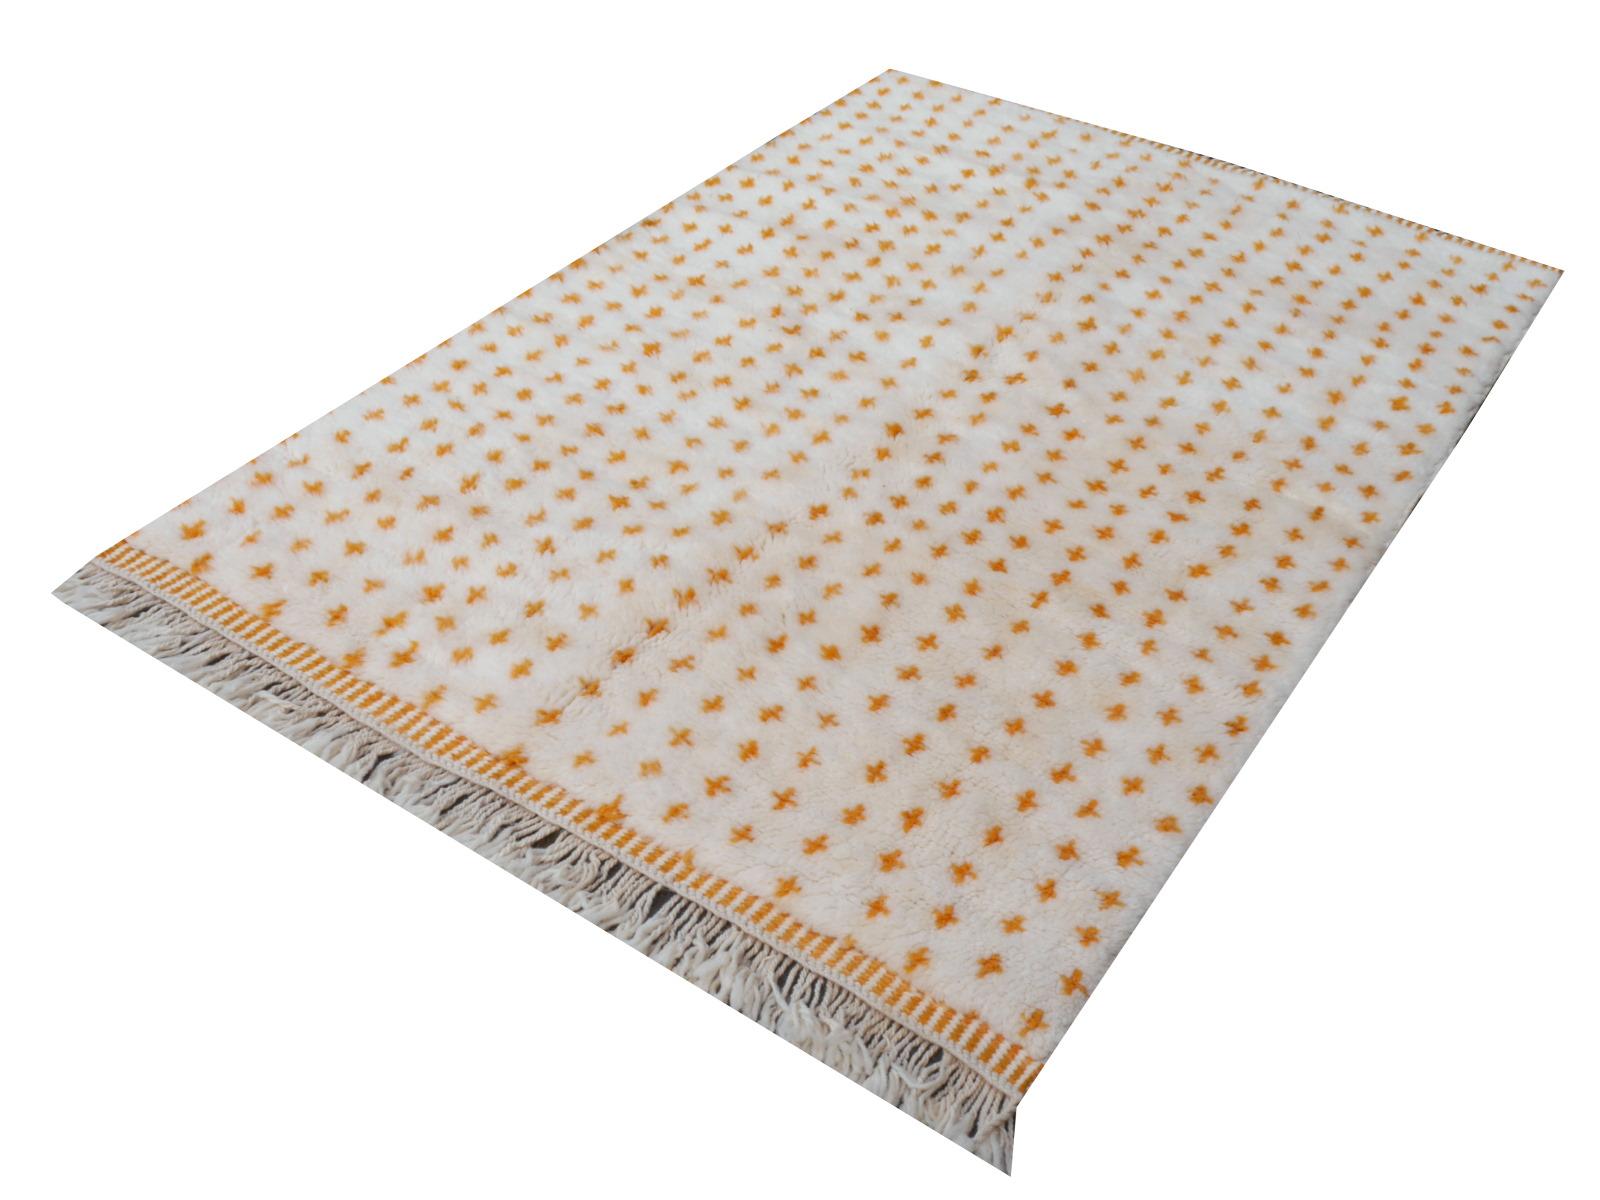 North African Moroccan Berber Rug Wool White Orange hand knotted - Sabah Collection

Berber rugs and carpets are mainly made in Morocco, Tunesia and Algeria. Largest producer are the tribal and nomadic Berber people of Morocco. Different areas